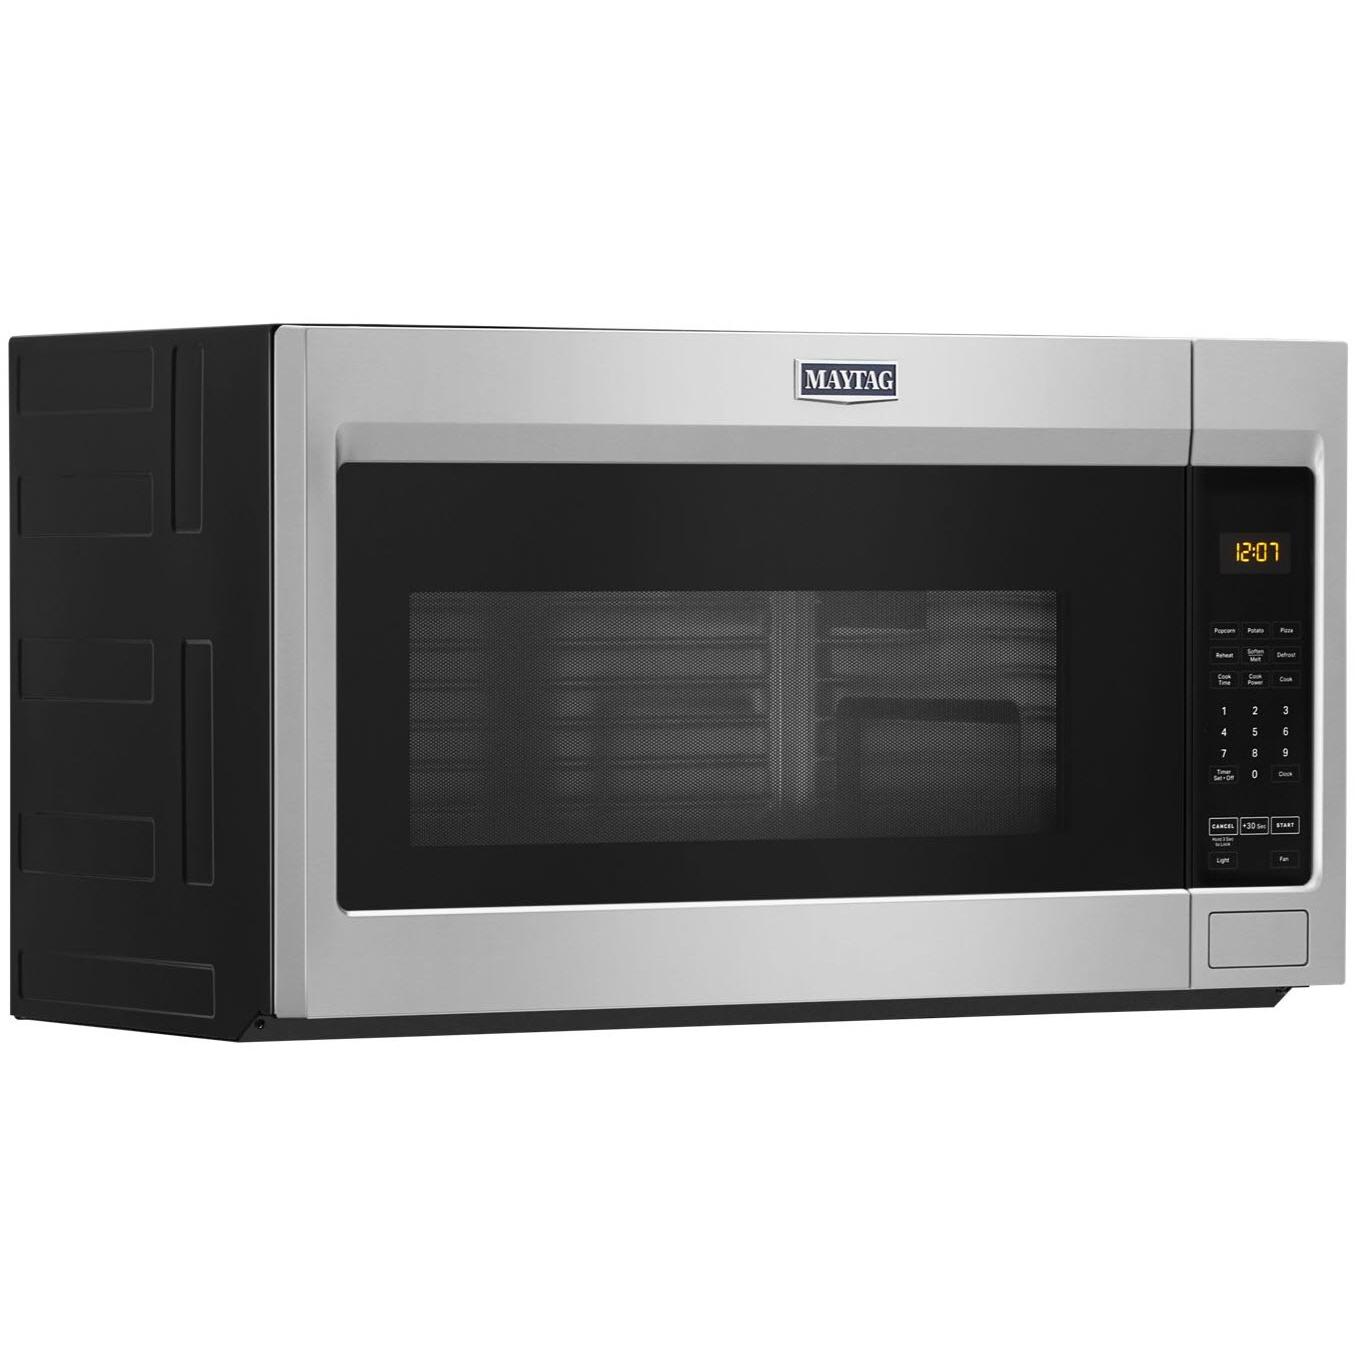 Maytag 30-inch, 1.7 cu.ft. Over-the-Range Microwave Oven with Stainless Steel Interior MMV1175JZ